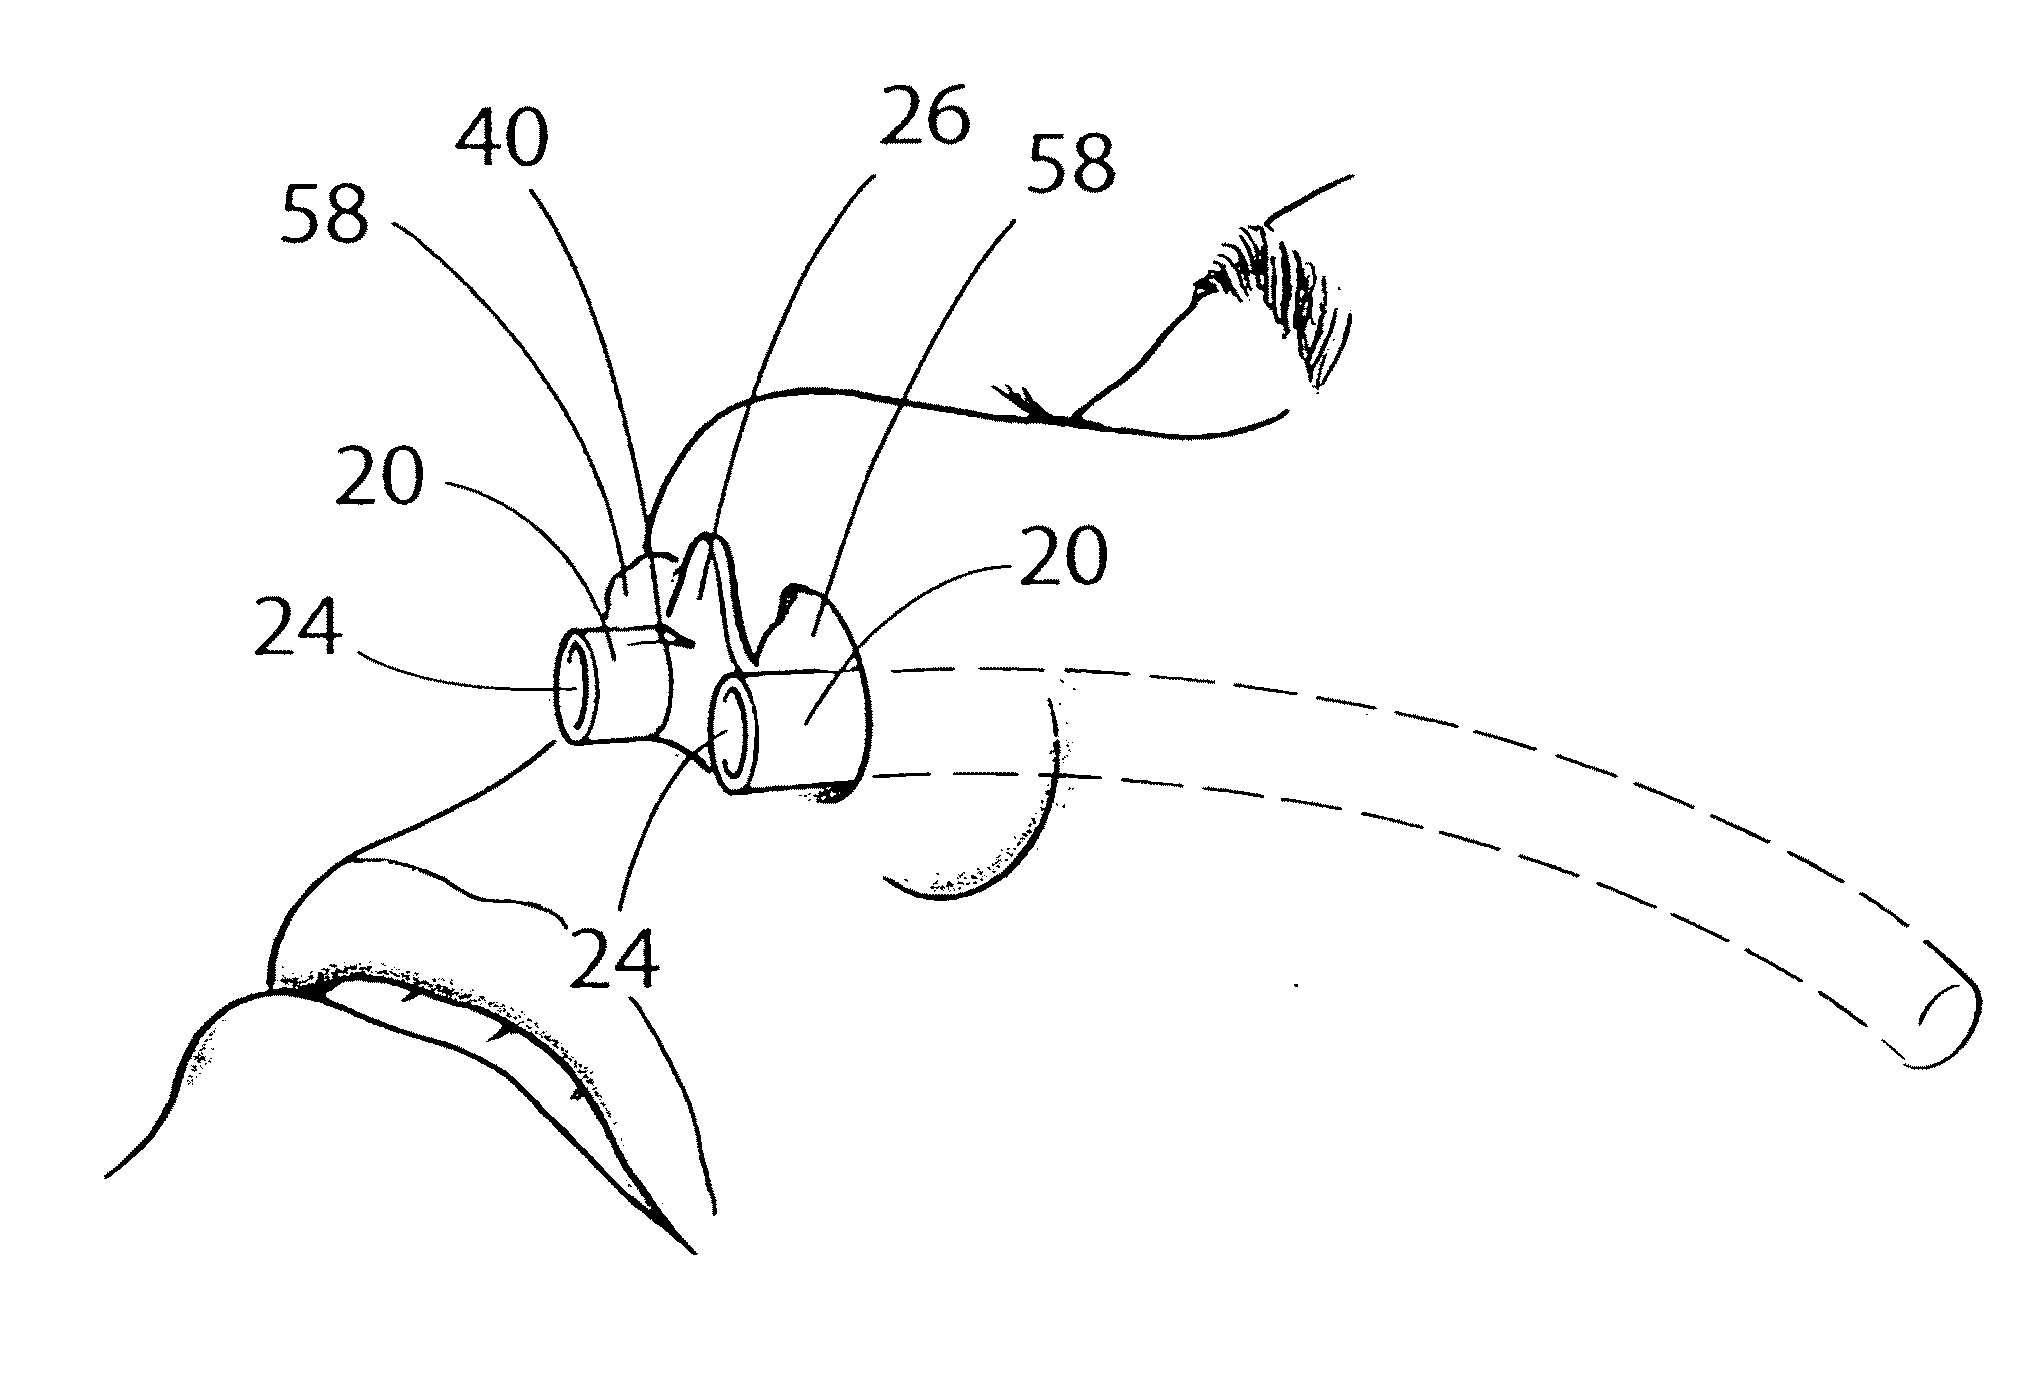 Device and method for maintaining unobstructed nasal passageways after nasal surgery